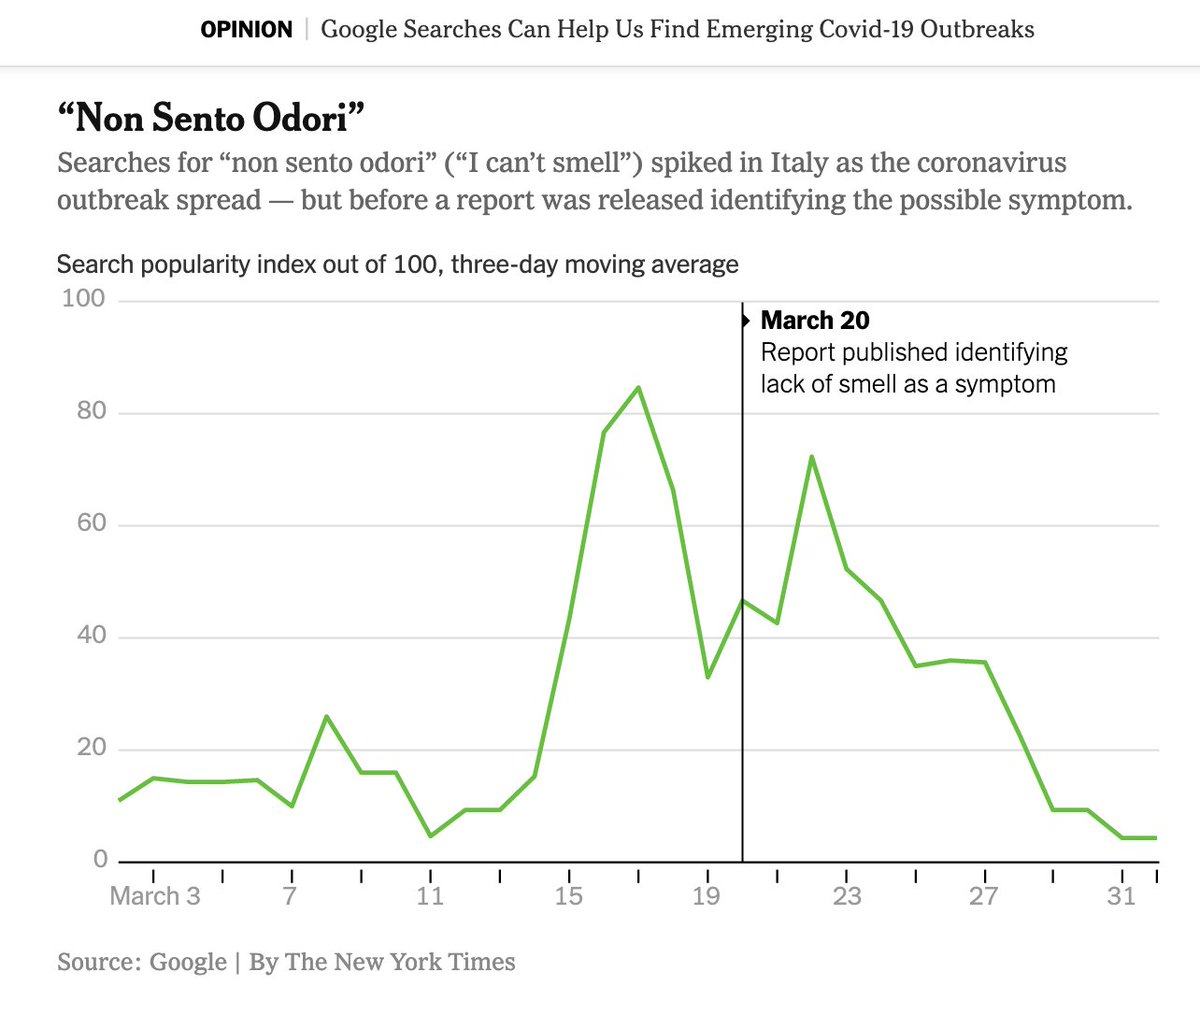 Searches for “non sento odori” (“I can’t smell”) spiked in  #Italy as the coronavirus outbreak spread — but before a report was released identifying the possible symptom. https://www.nytimes.com/2020/04/05/opinion/coronavirus-google-searches.html